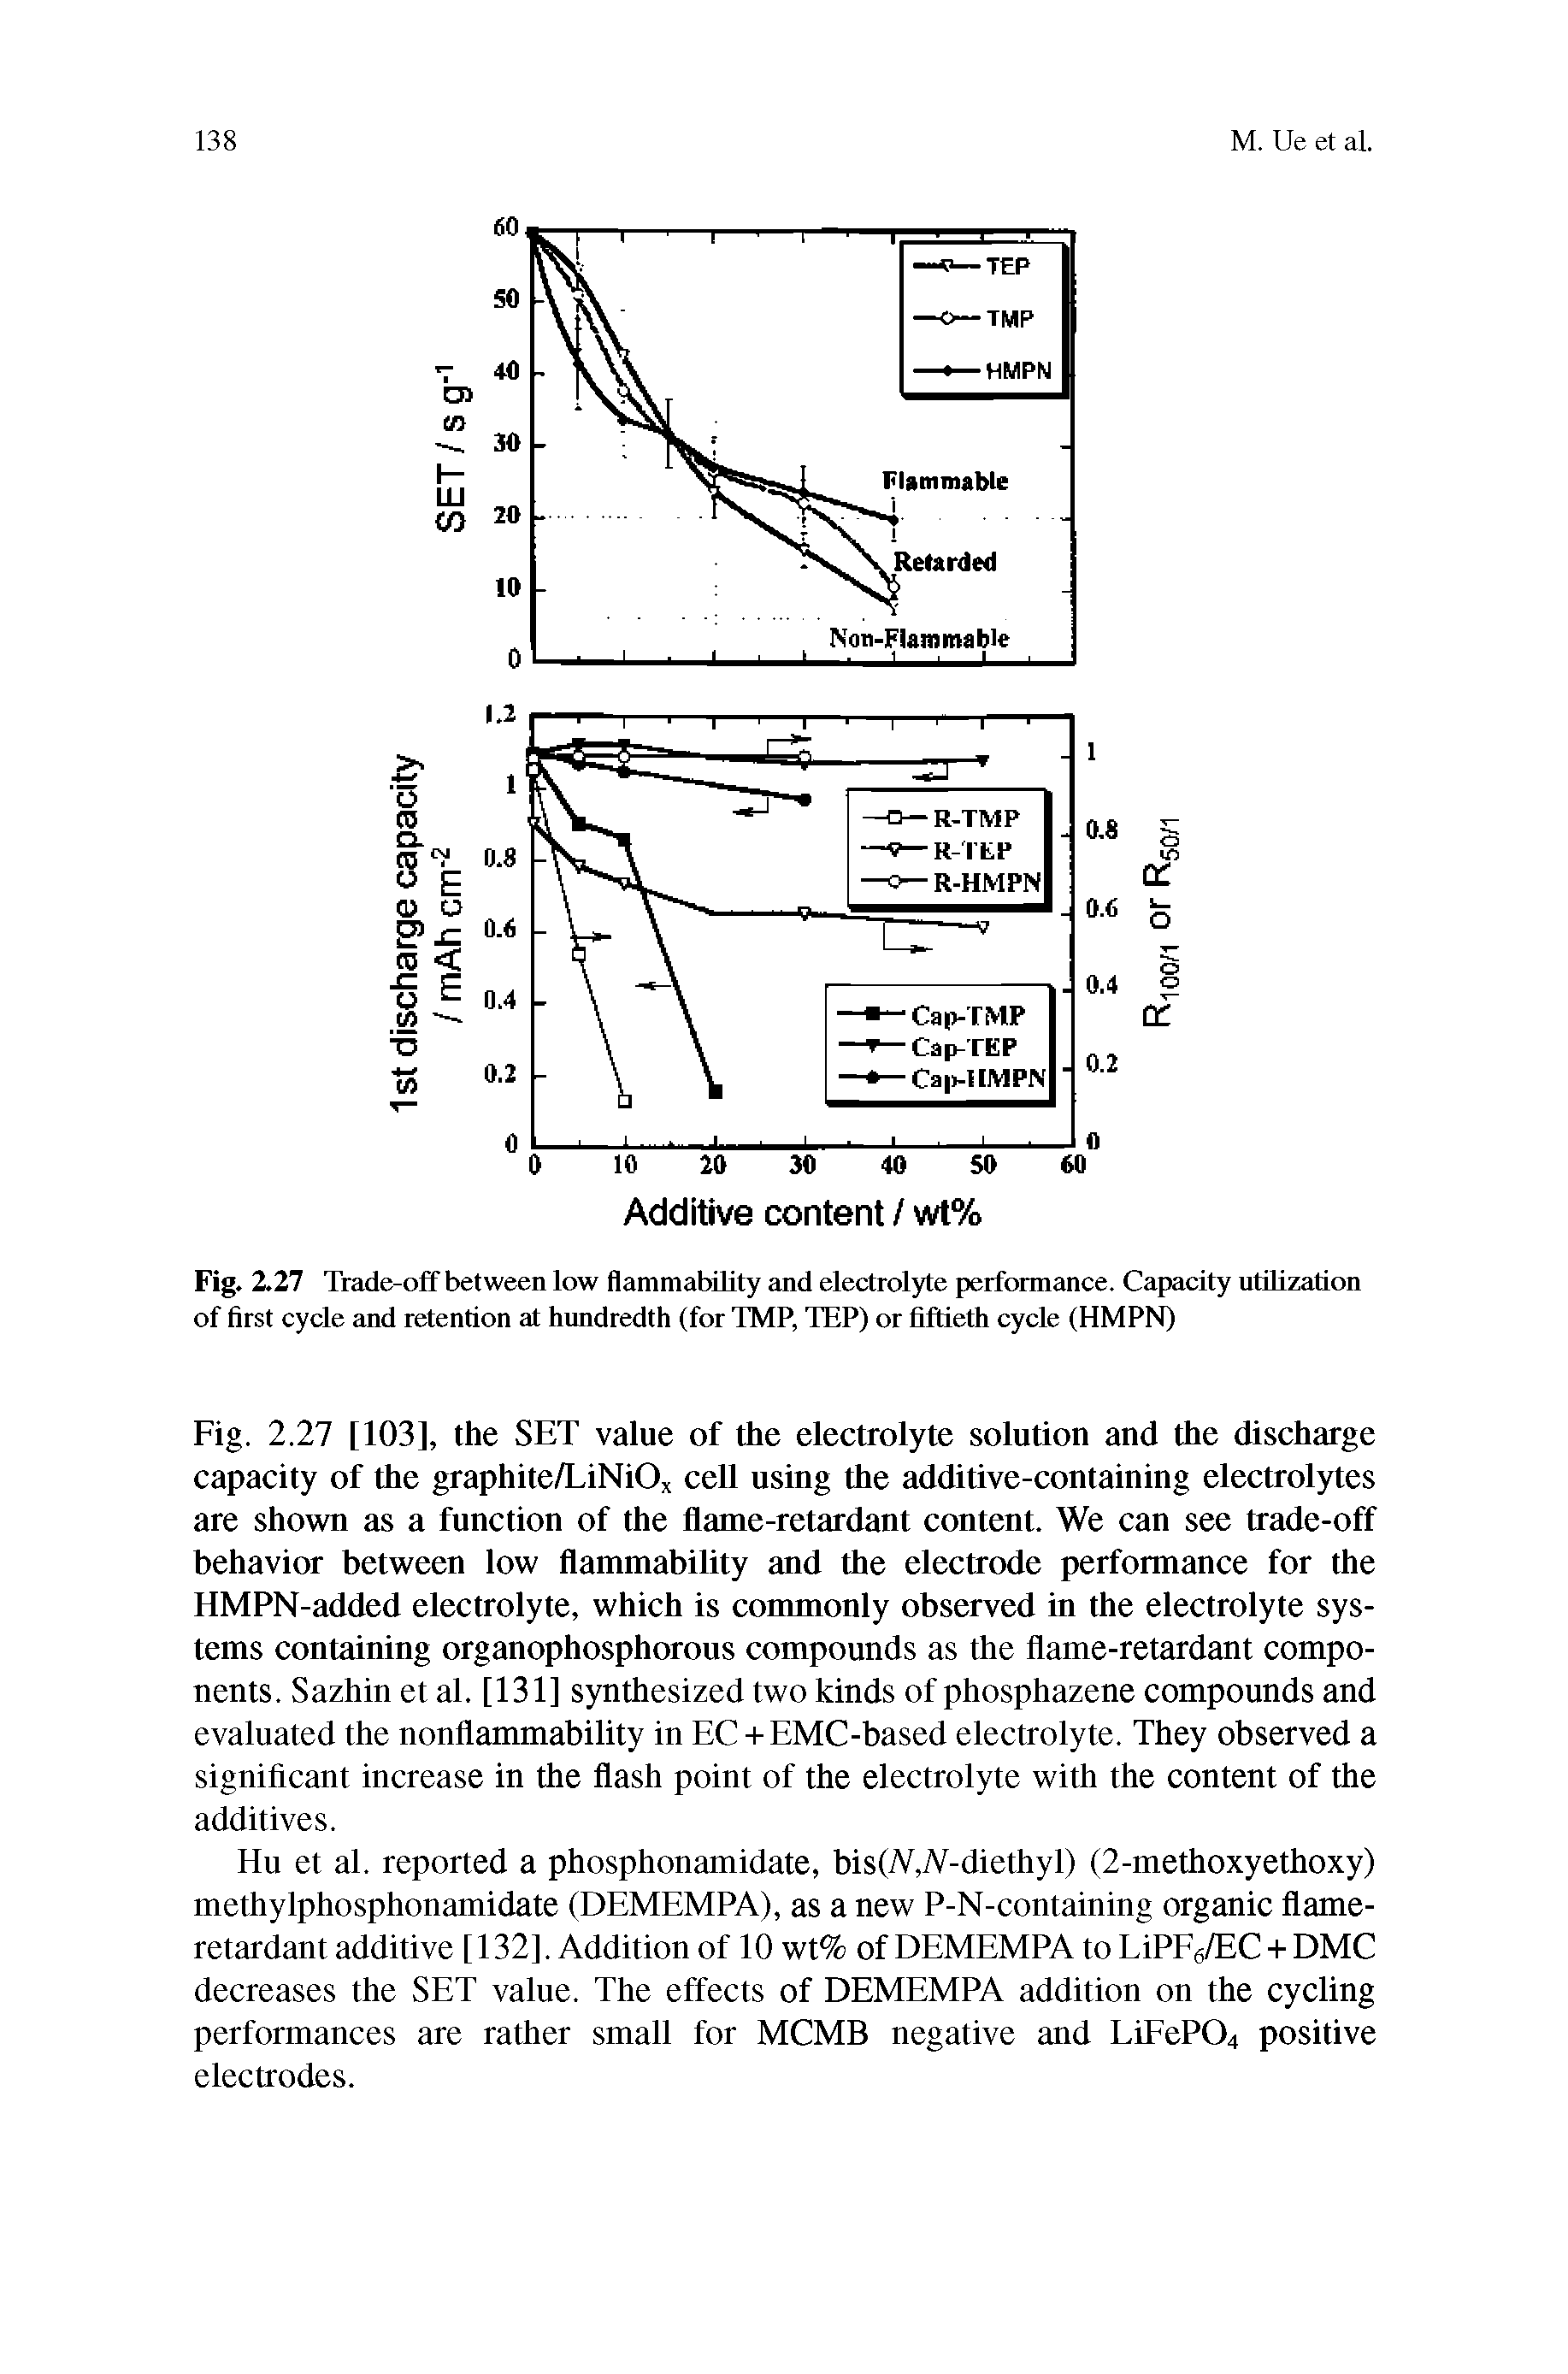 Fig. 2.27 Trade-off between low flammability and electrolyte performance. Capacity utilization of first cycle and retention at hundredth (for TMP, TEP) or fiftieth cycle (HMPN)...